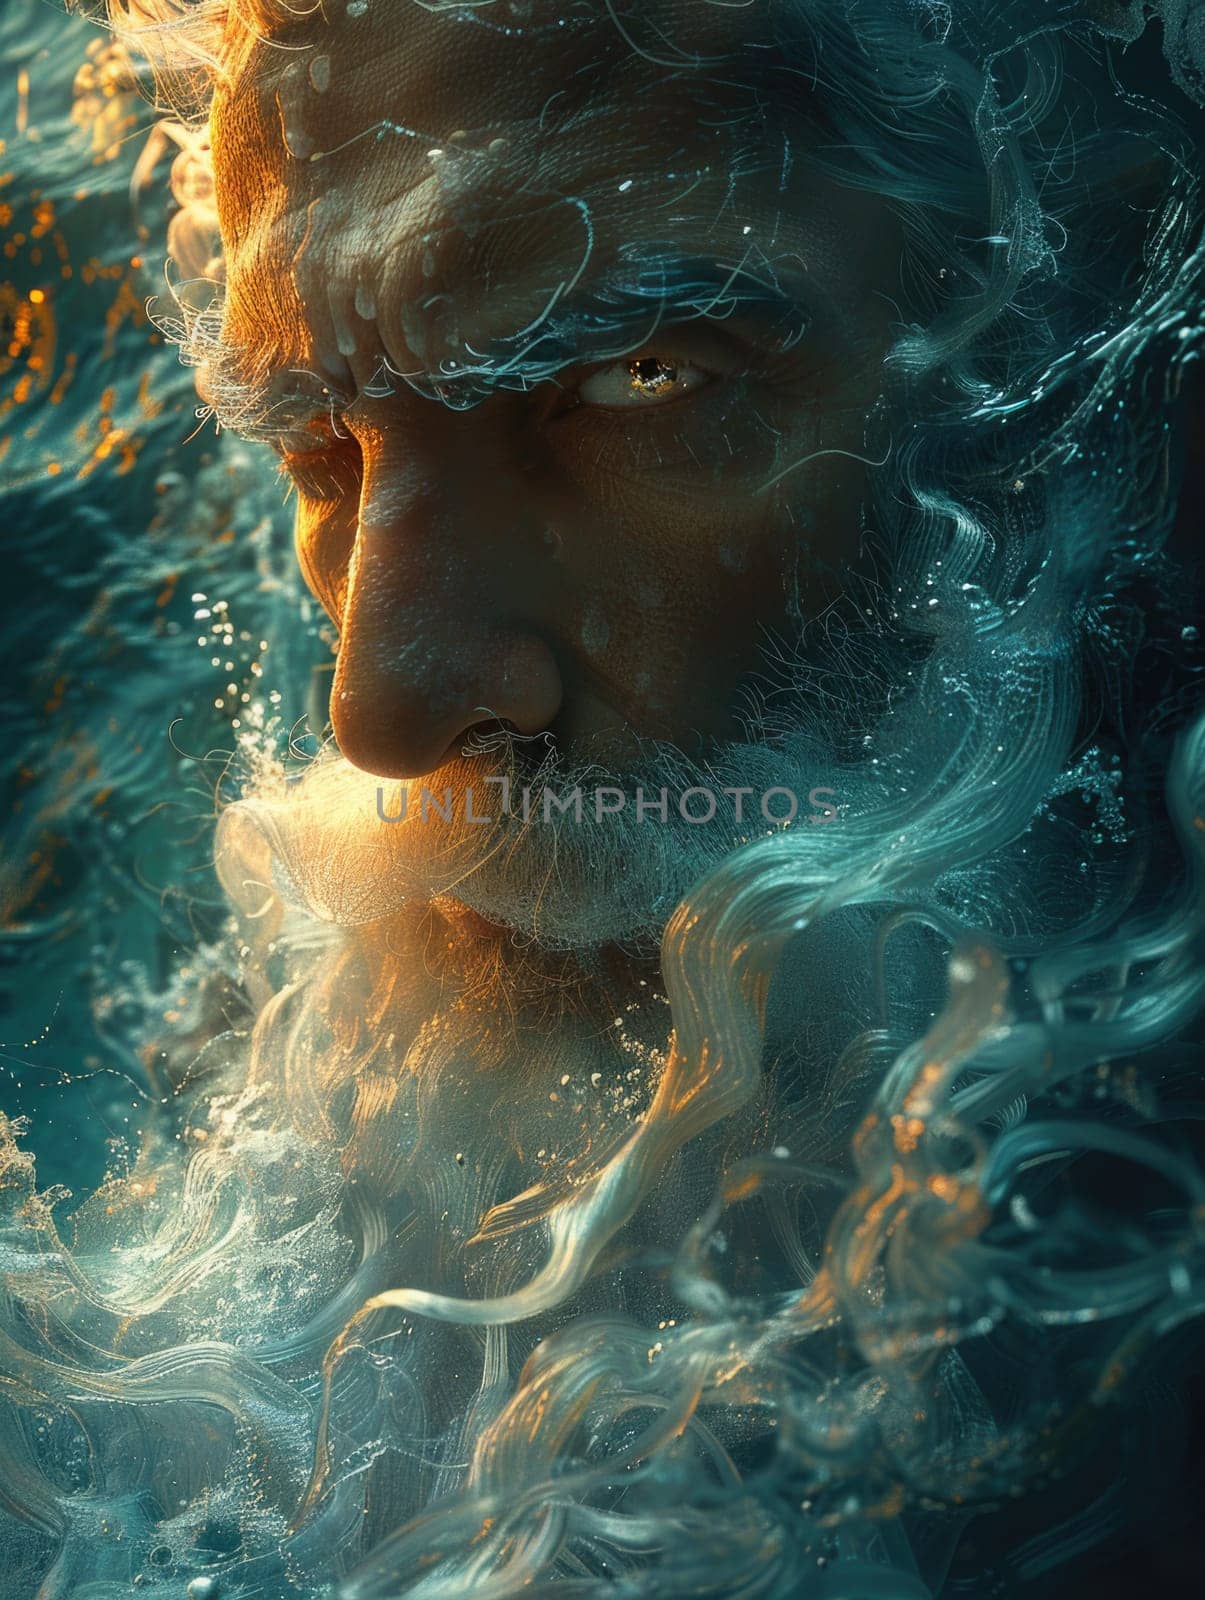 A man with a beard standing in the water, portraying a connection with the aquatic environment.